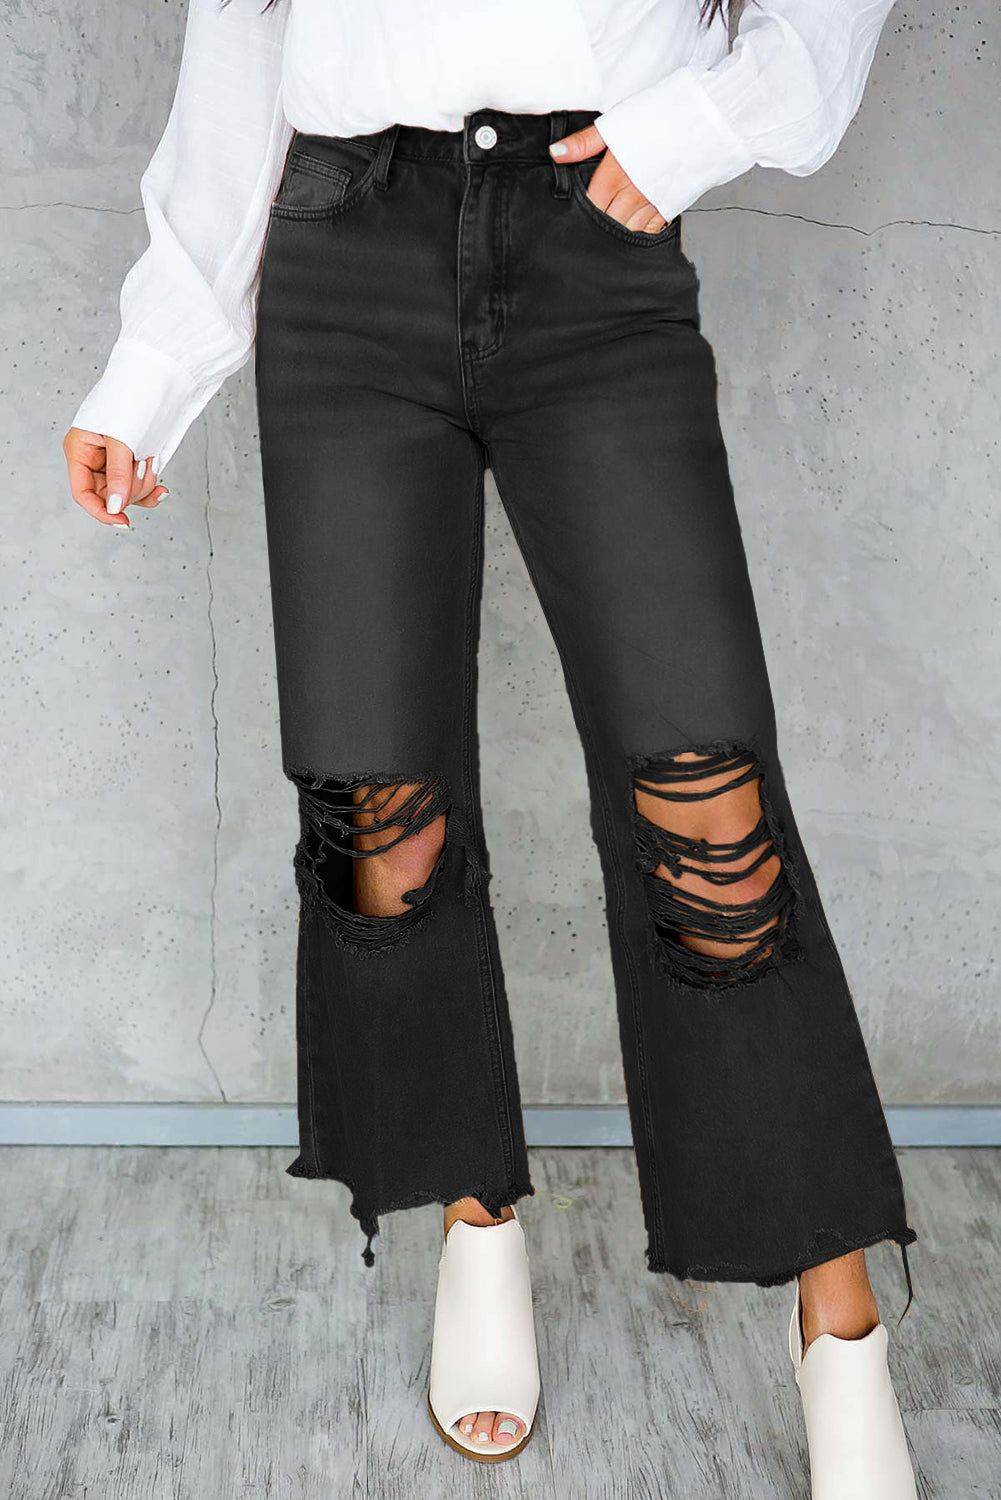 Black Distressed Hollow-out High Waist Cropped Flare Womens Jeans - US2EInc Apparel Plug Ltd. Co